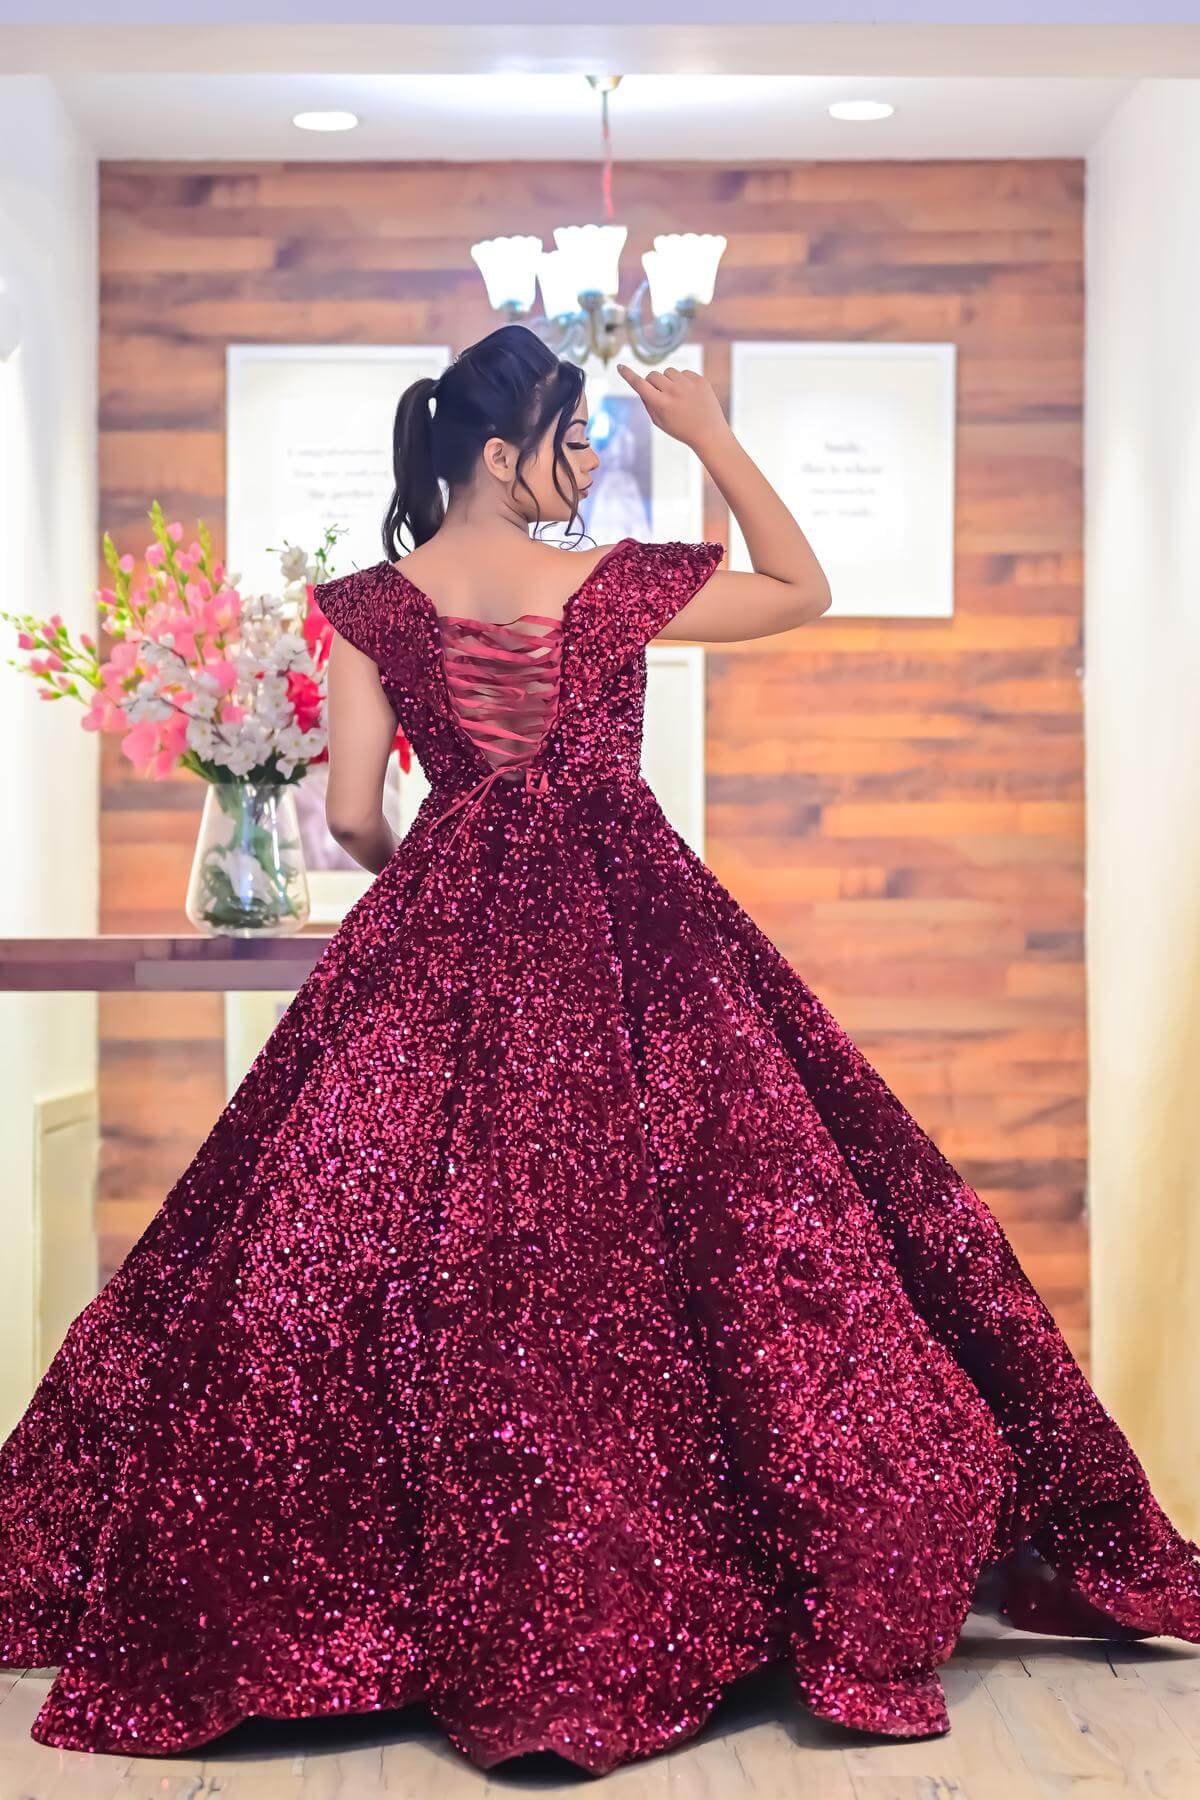 Explore 127+ sequin ball gown latest